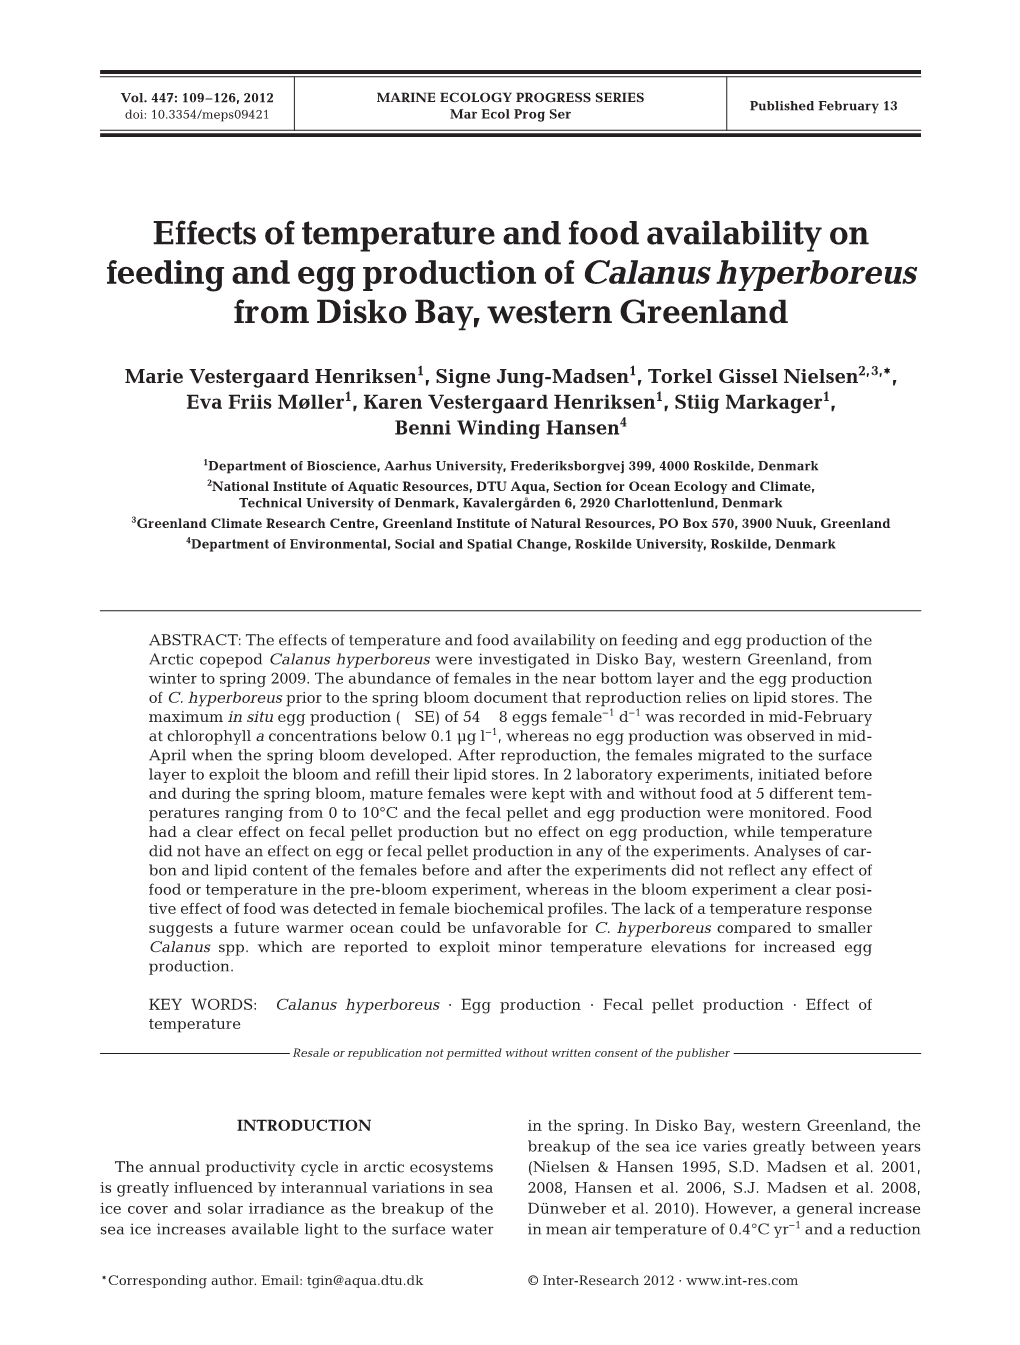 Effects of Temperature and Food Availability on Feeding and Egg Production of Calanus Hyperboreus from Disko Bay, Western Greenland